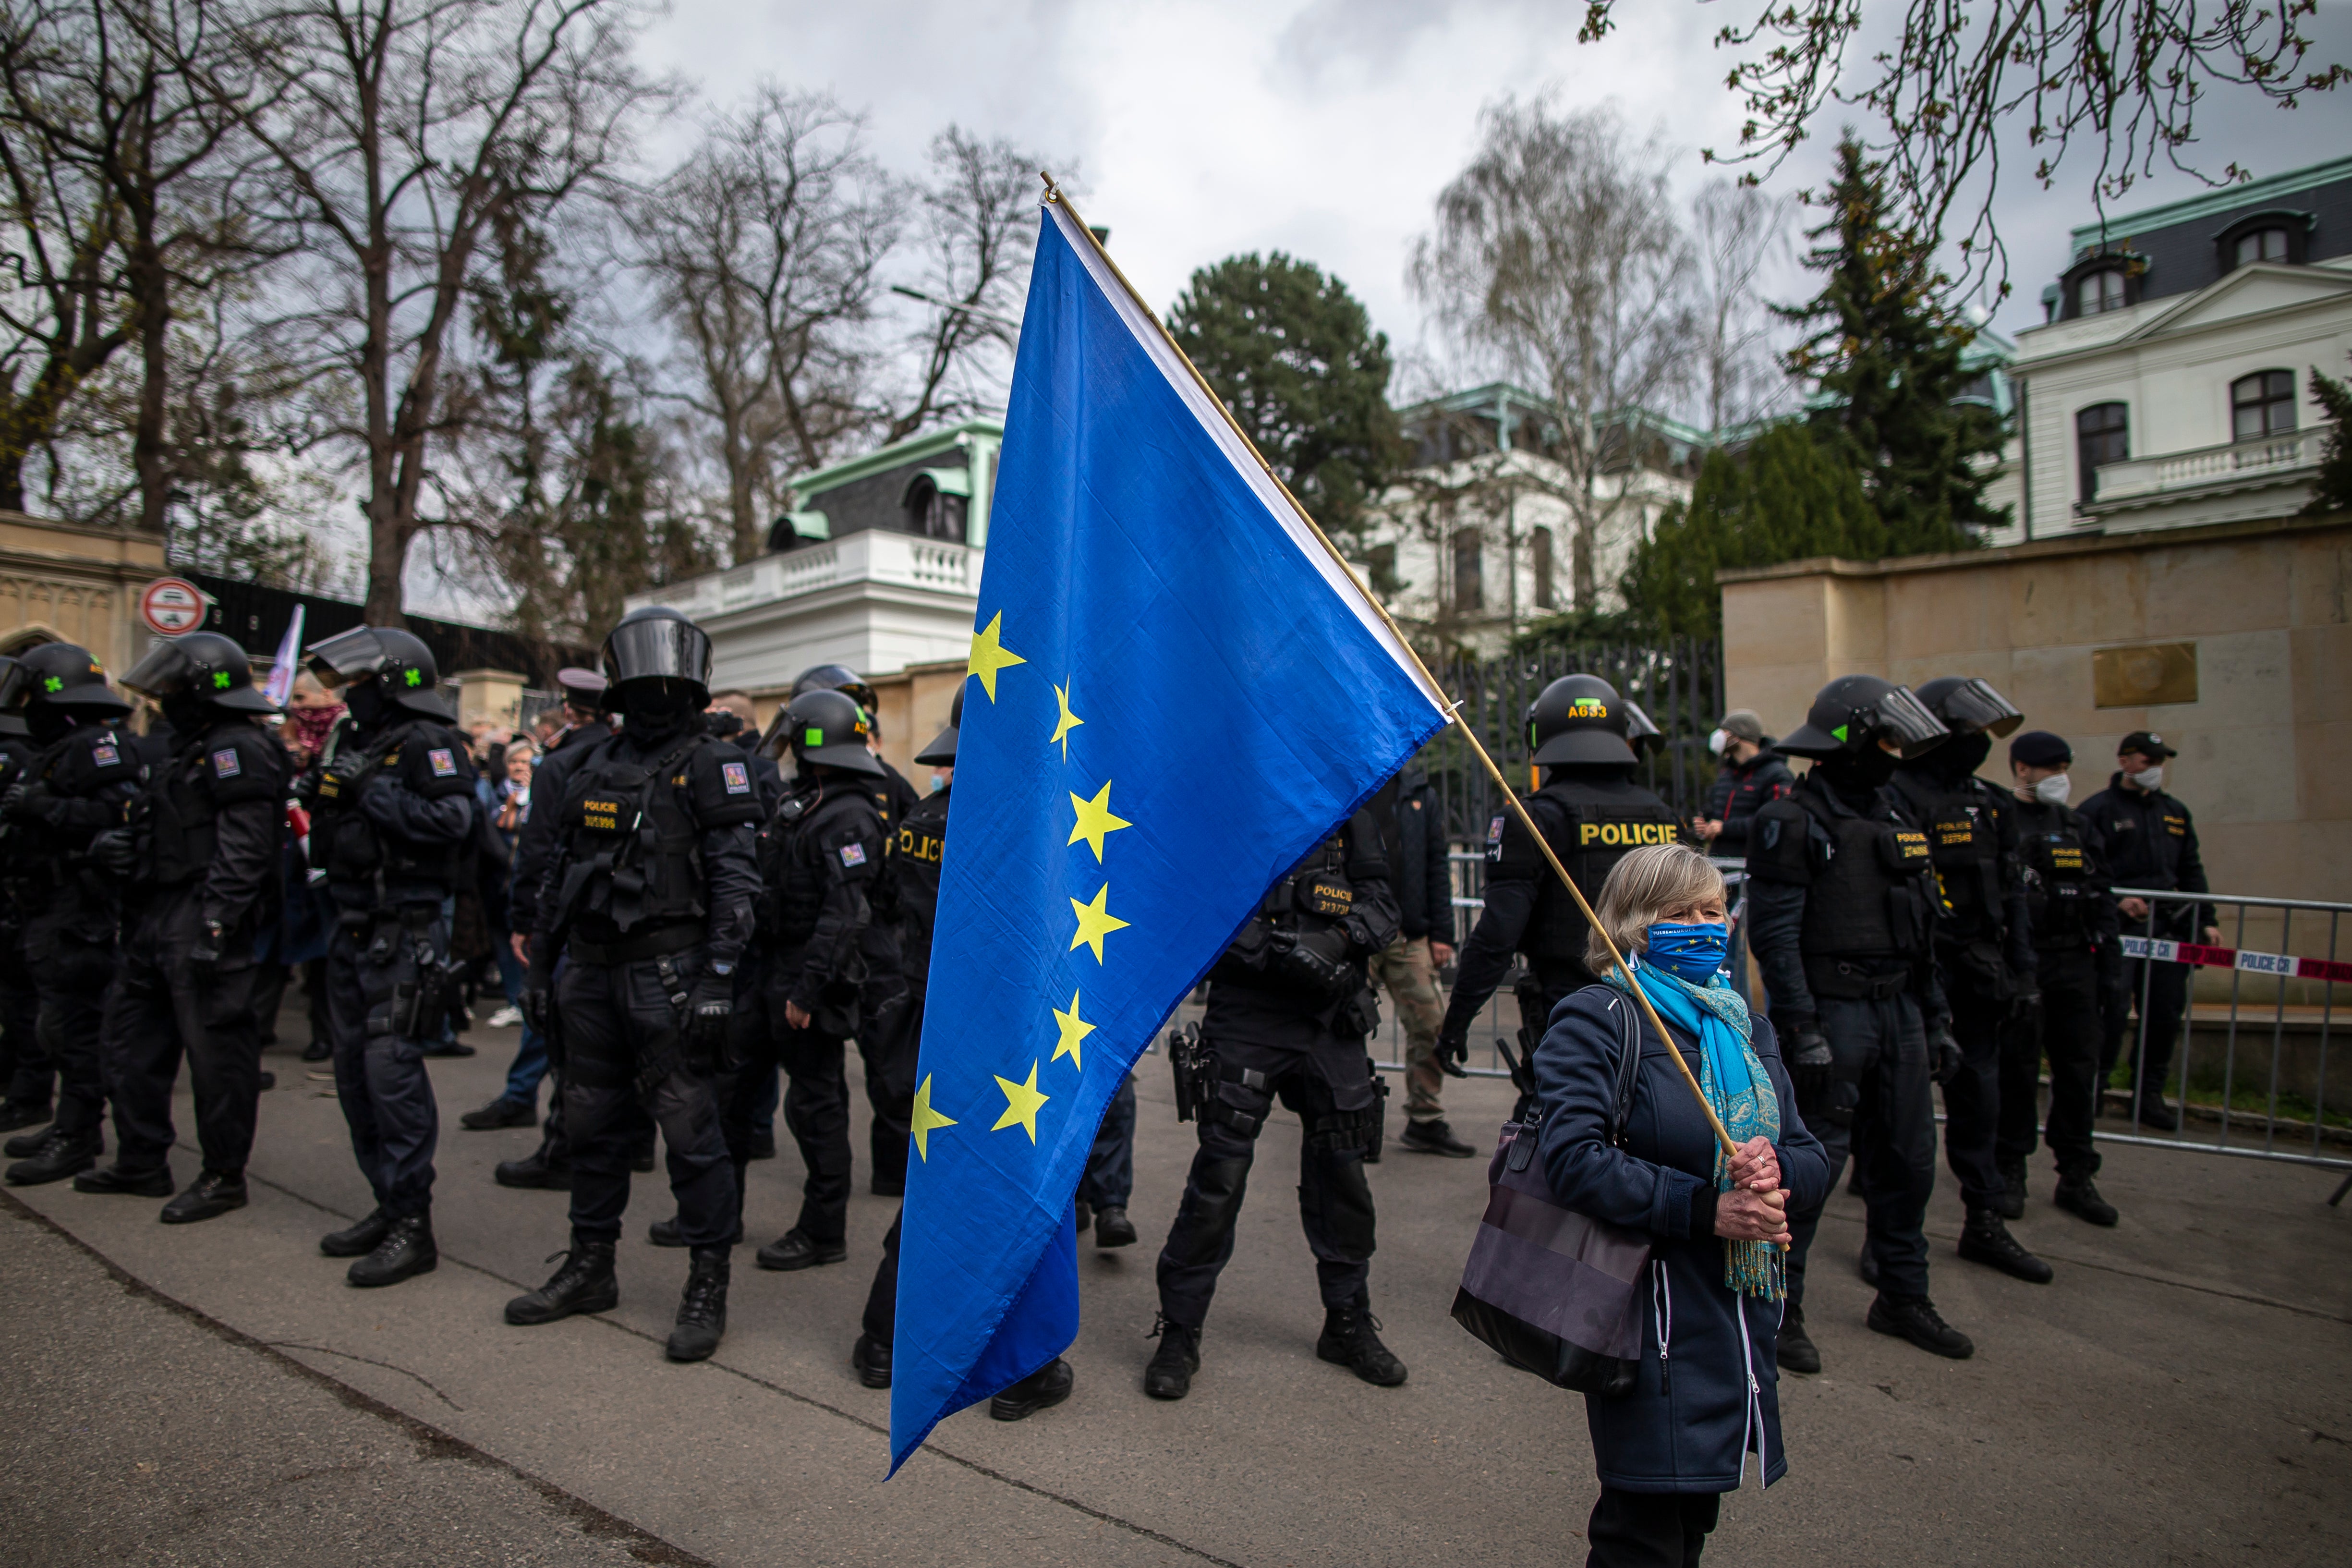 A woman holds an EU flag as people gather to protest outside the Russian Embassy on April 18 in Prague